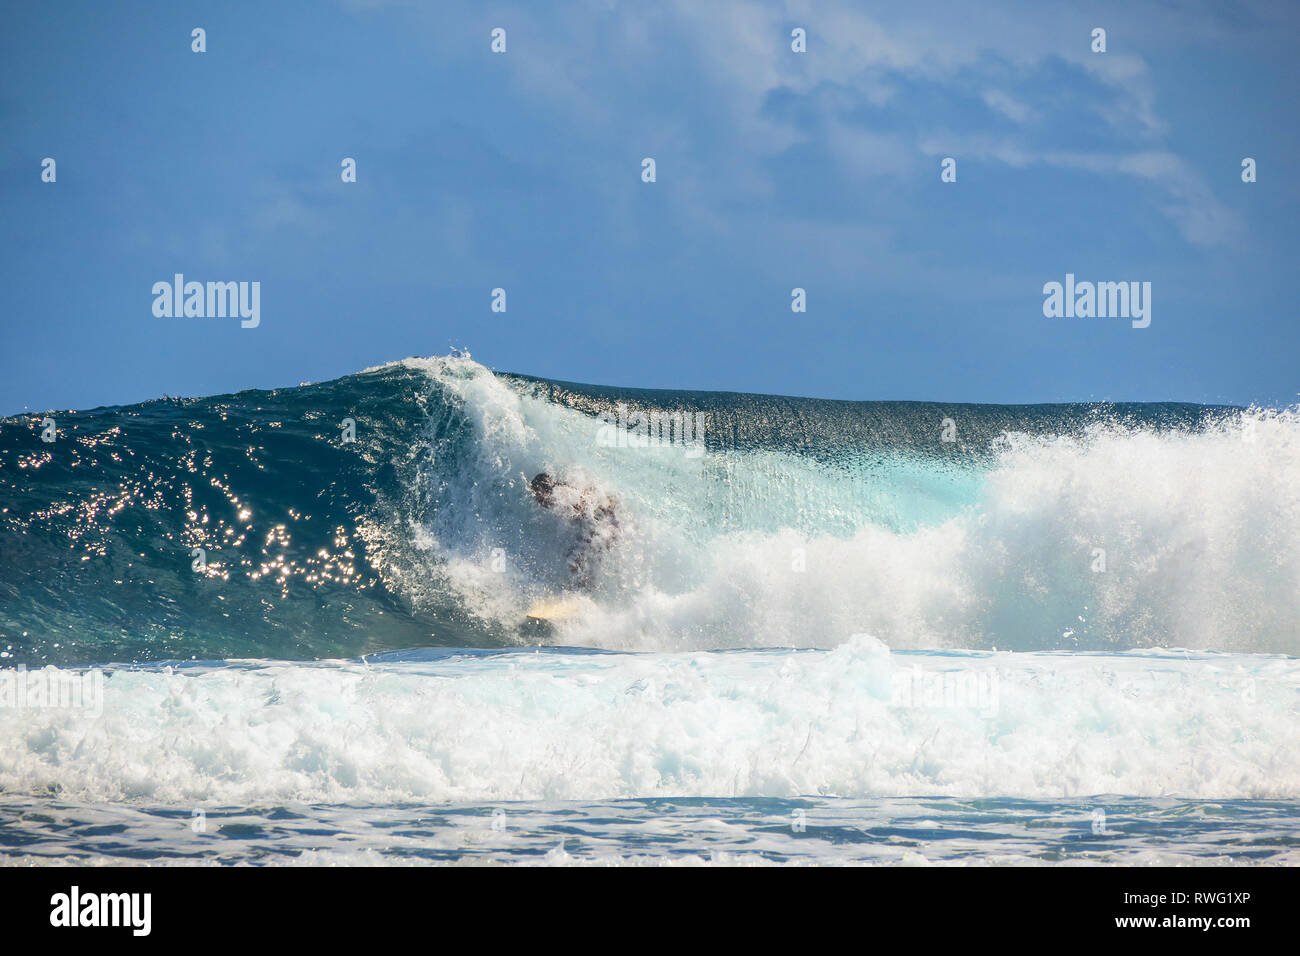 Surfer Getting Swallowed in Barrel Wave at Cloud 9 - Siargao, Philippines Stock Photo